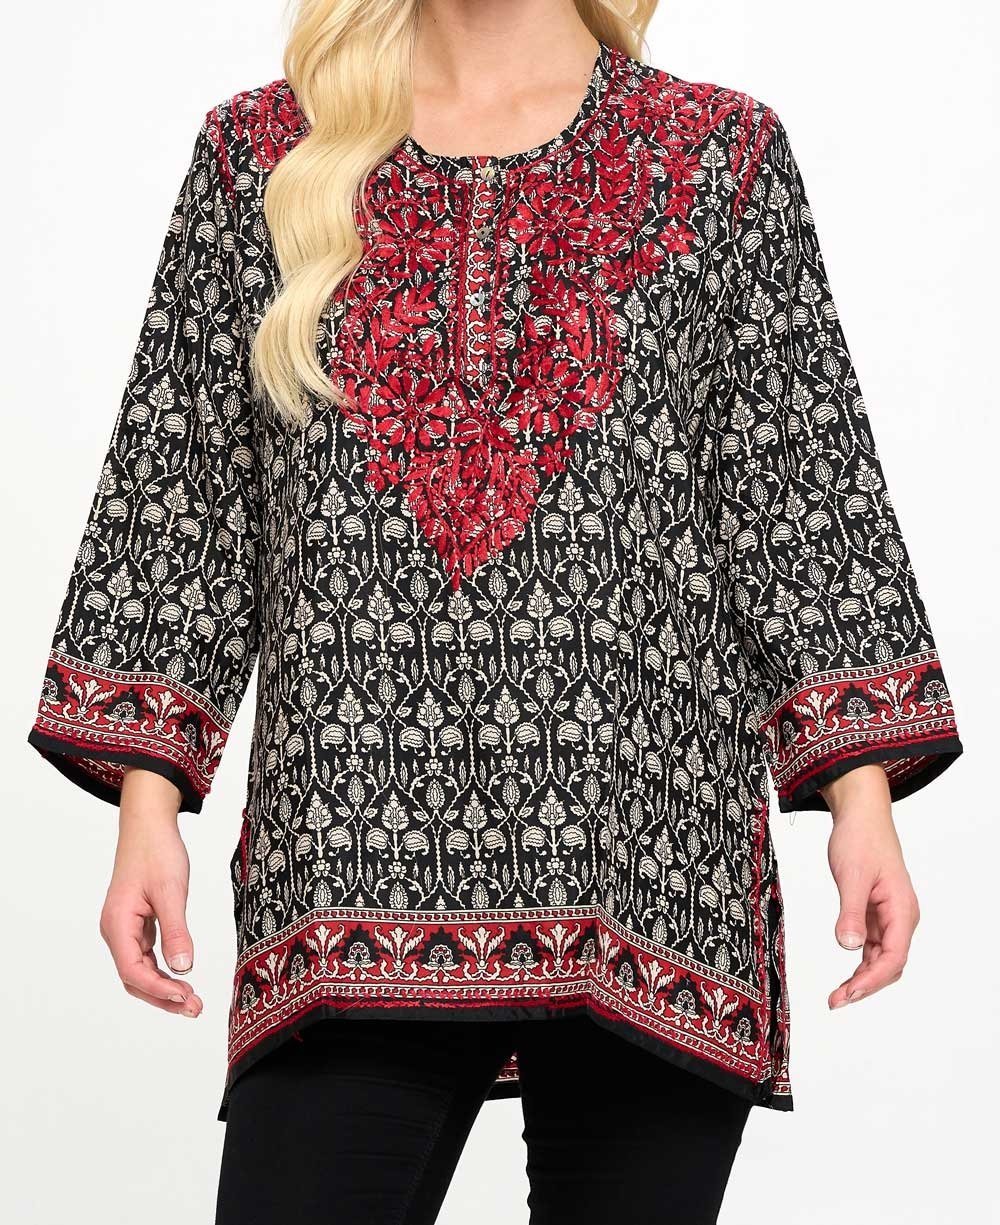 Black and White Tunic With Red Hand Embroidery - Shirts & Tops S